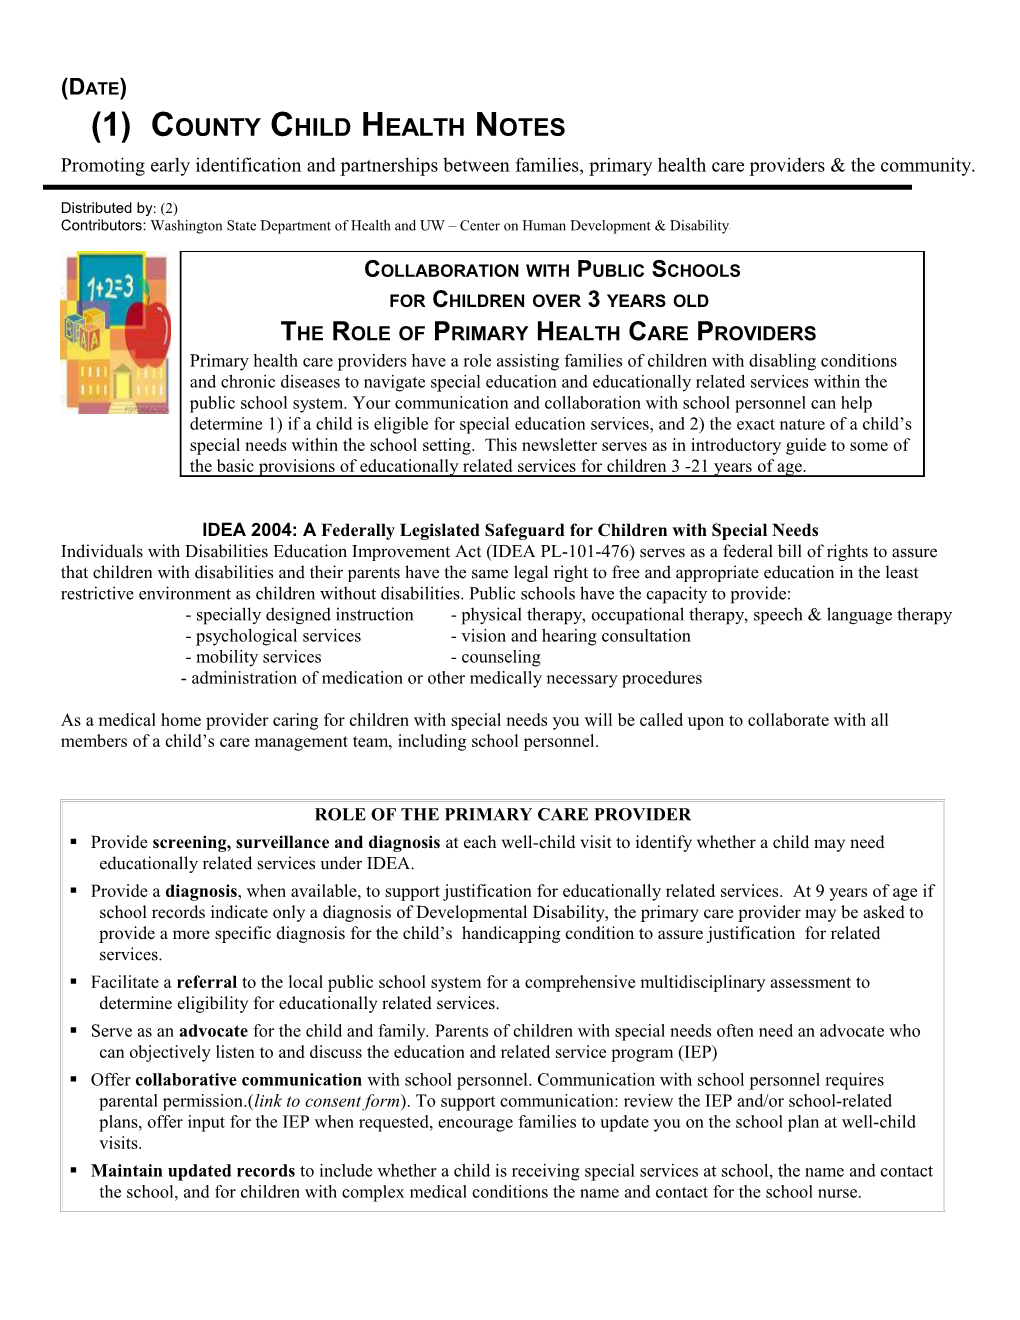 (1) County Child Health Notes s2